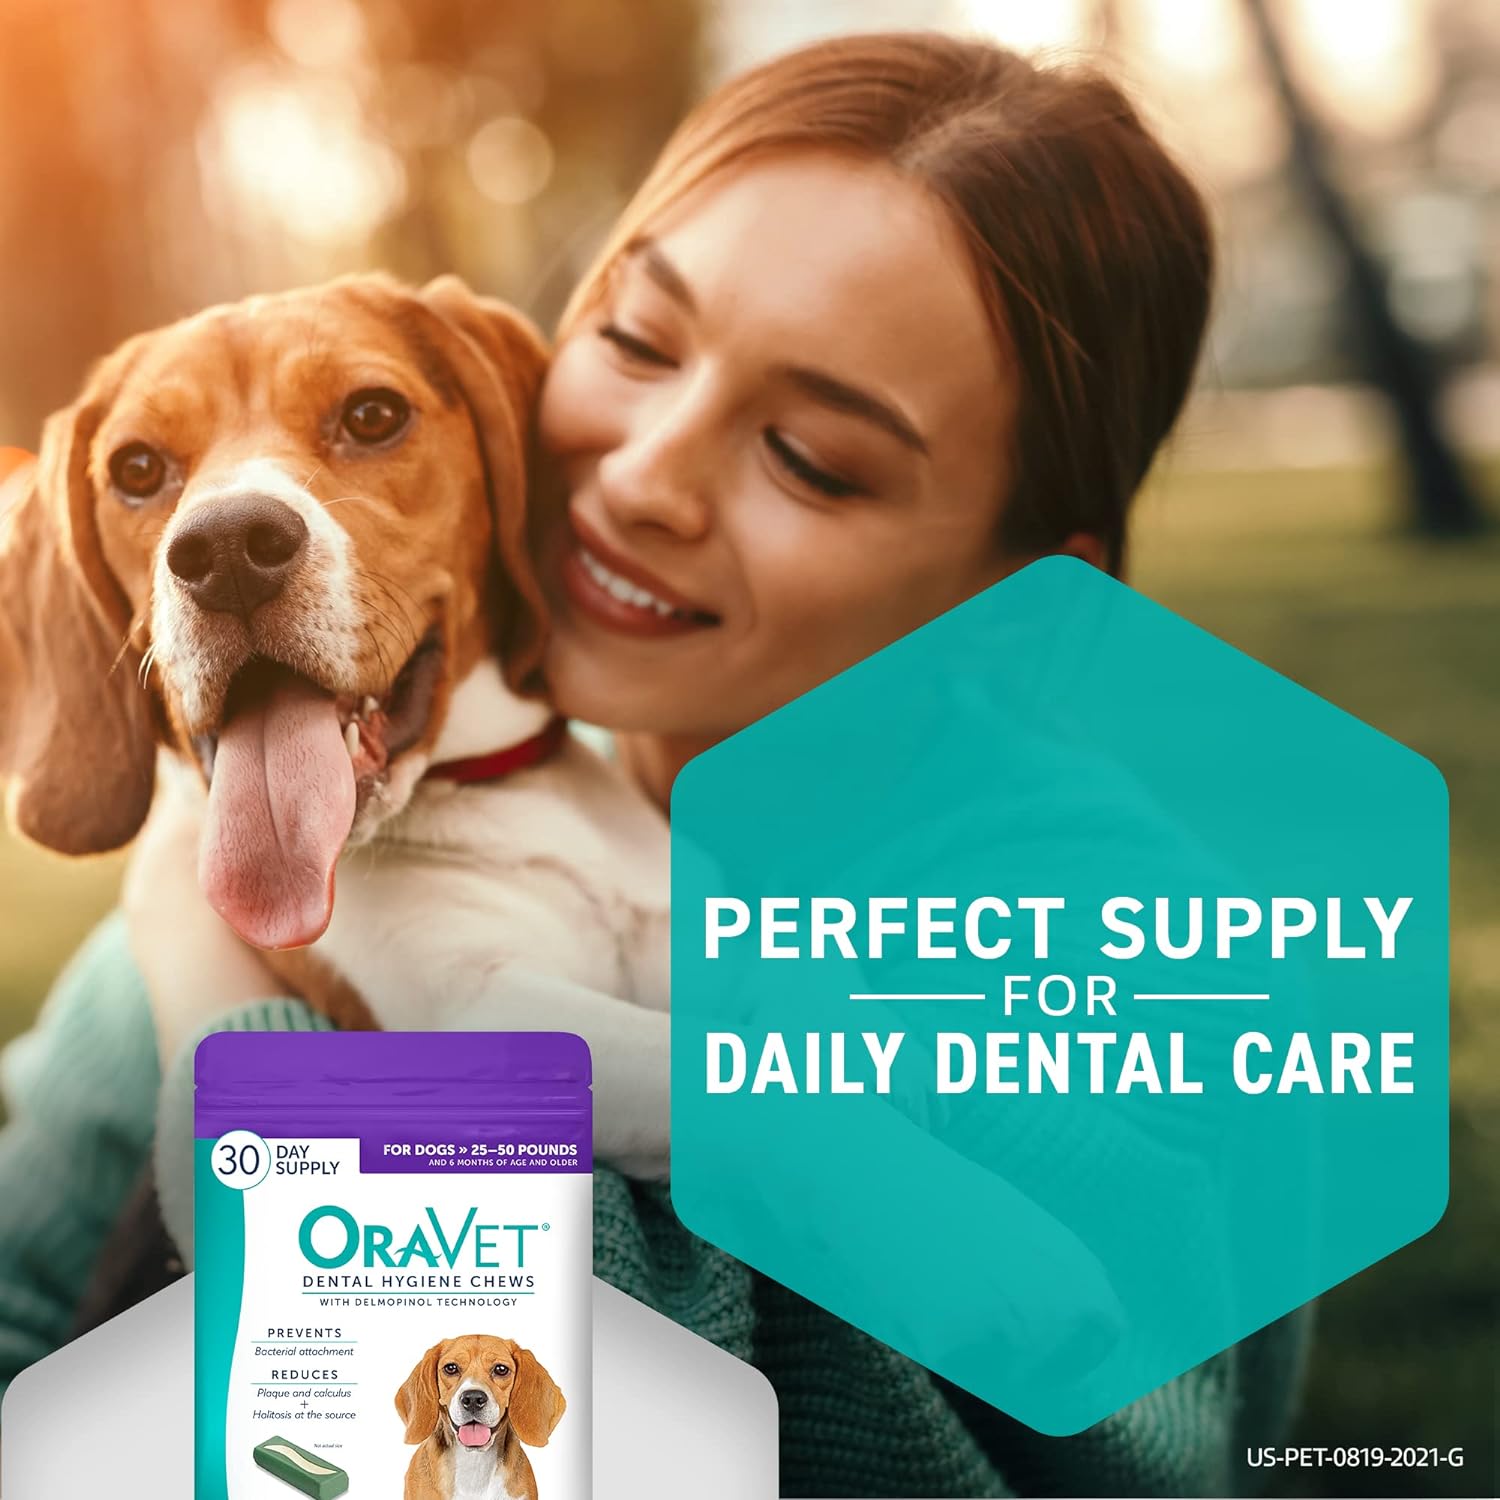 ORAVET Dental Chews for Dogs, Oral Care and Hygiene Chews (Medium Dogs, 25-50 lbs.) Purple Pouch, 30 Count : Pet Supplies